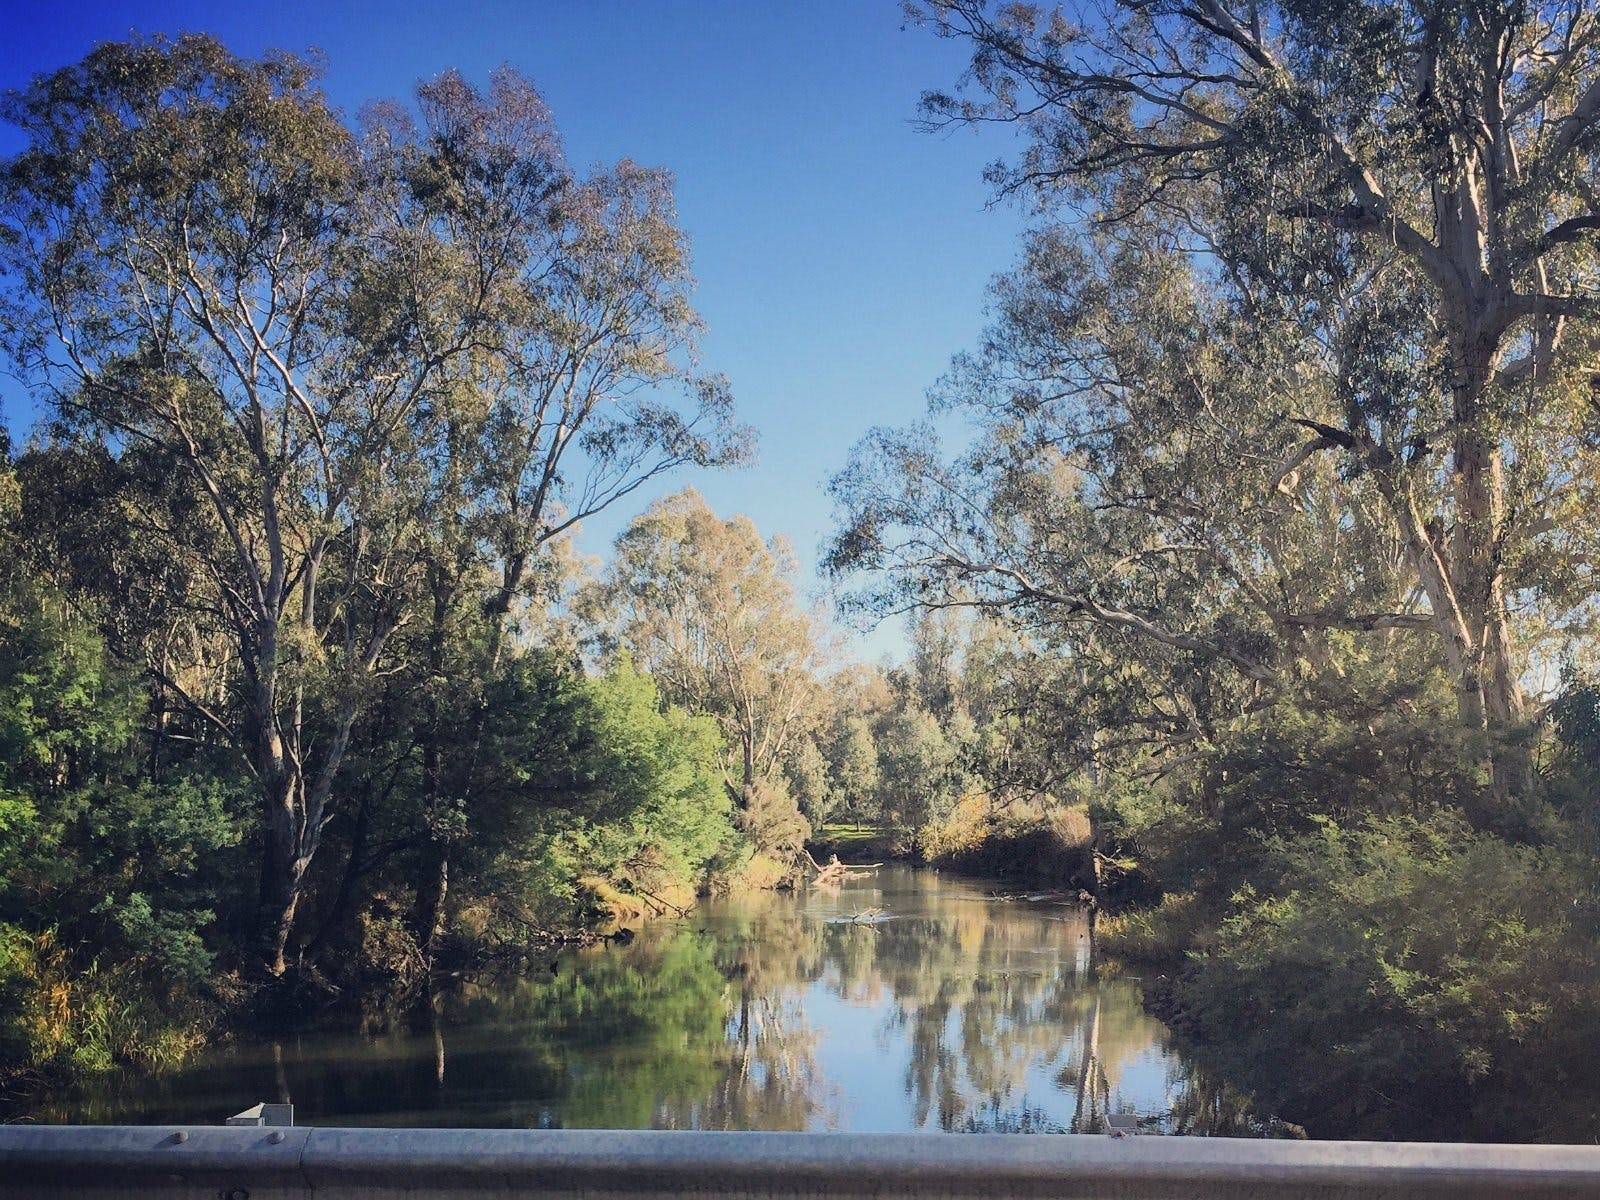 View of the Ovens river on a sunny day looking towards the bush camping reserve gum and wattle trees